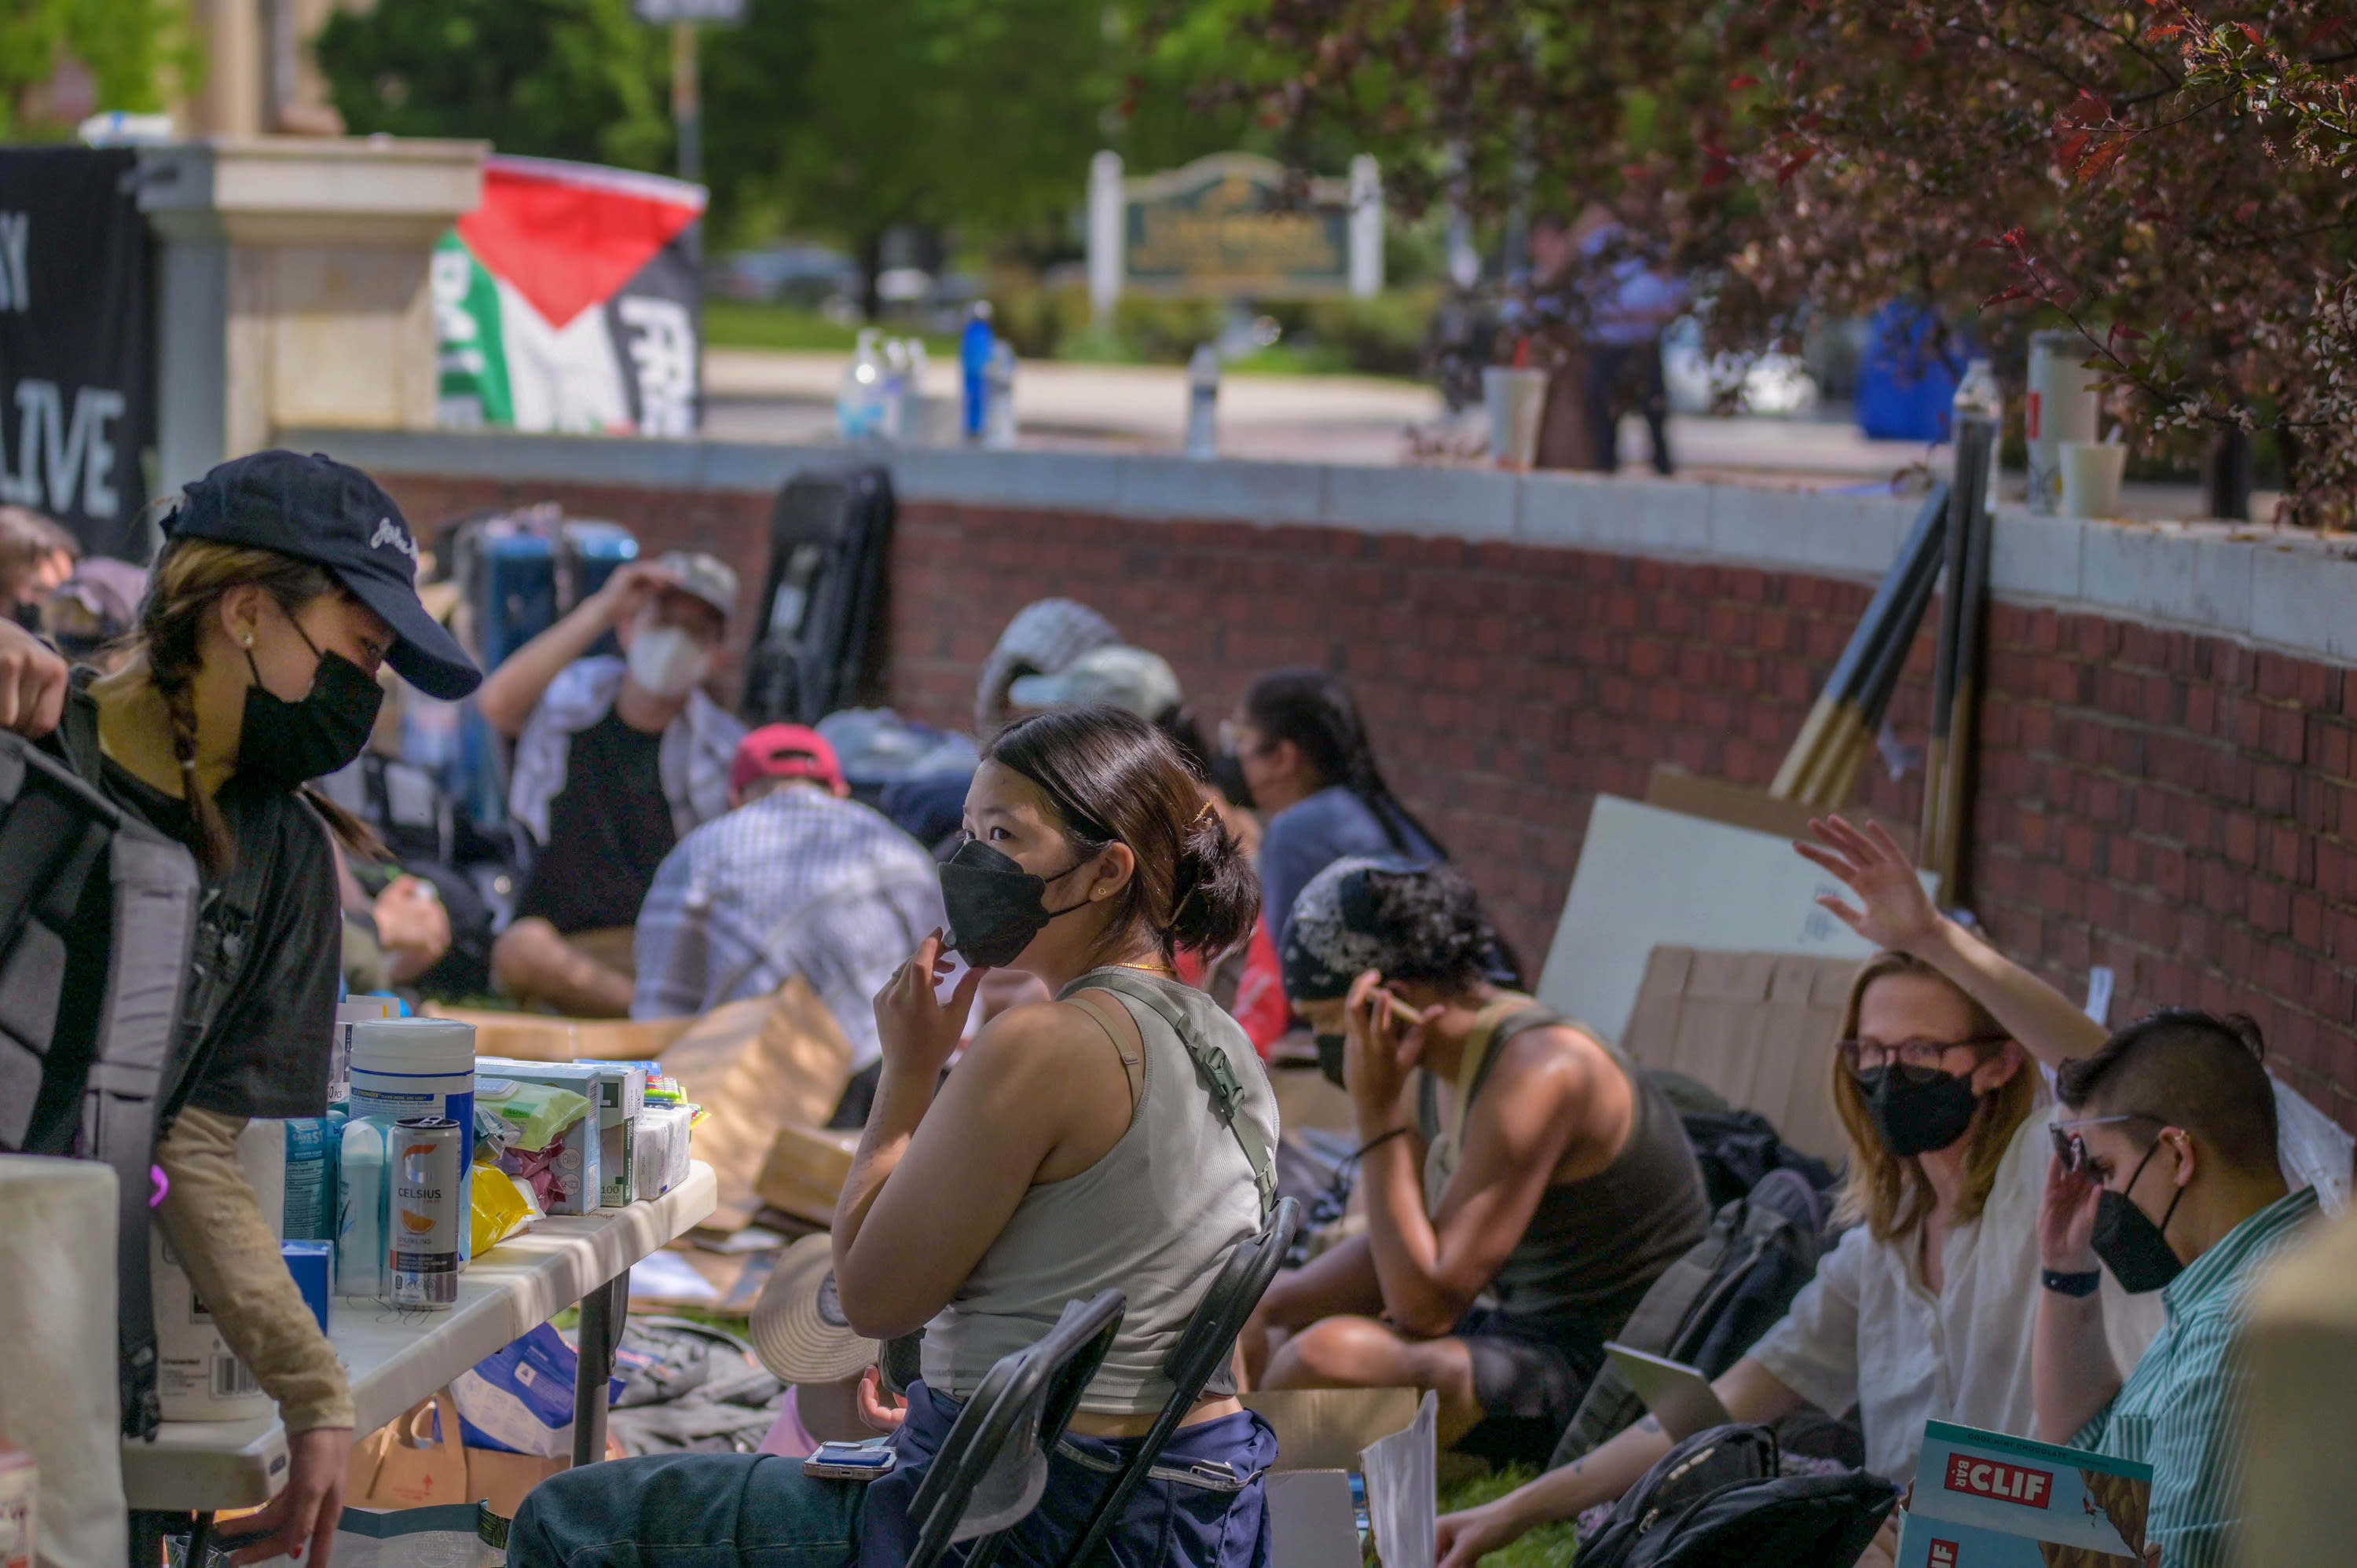 Johns Hopkins encampment ends after protesters, university come to agreement